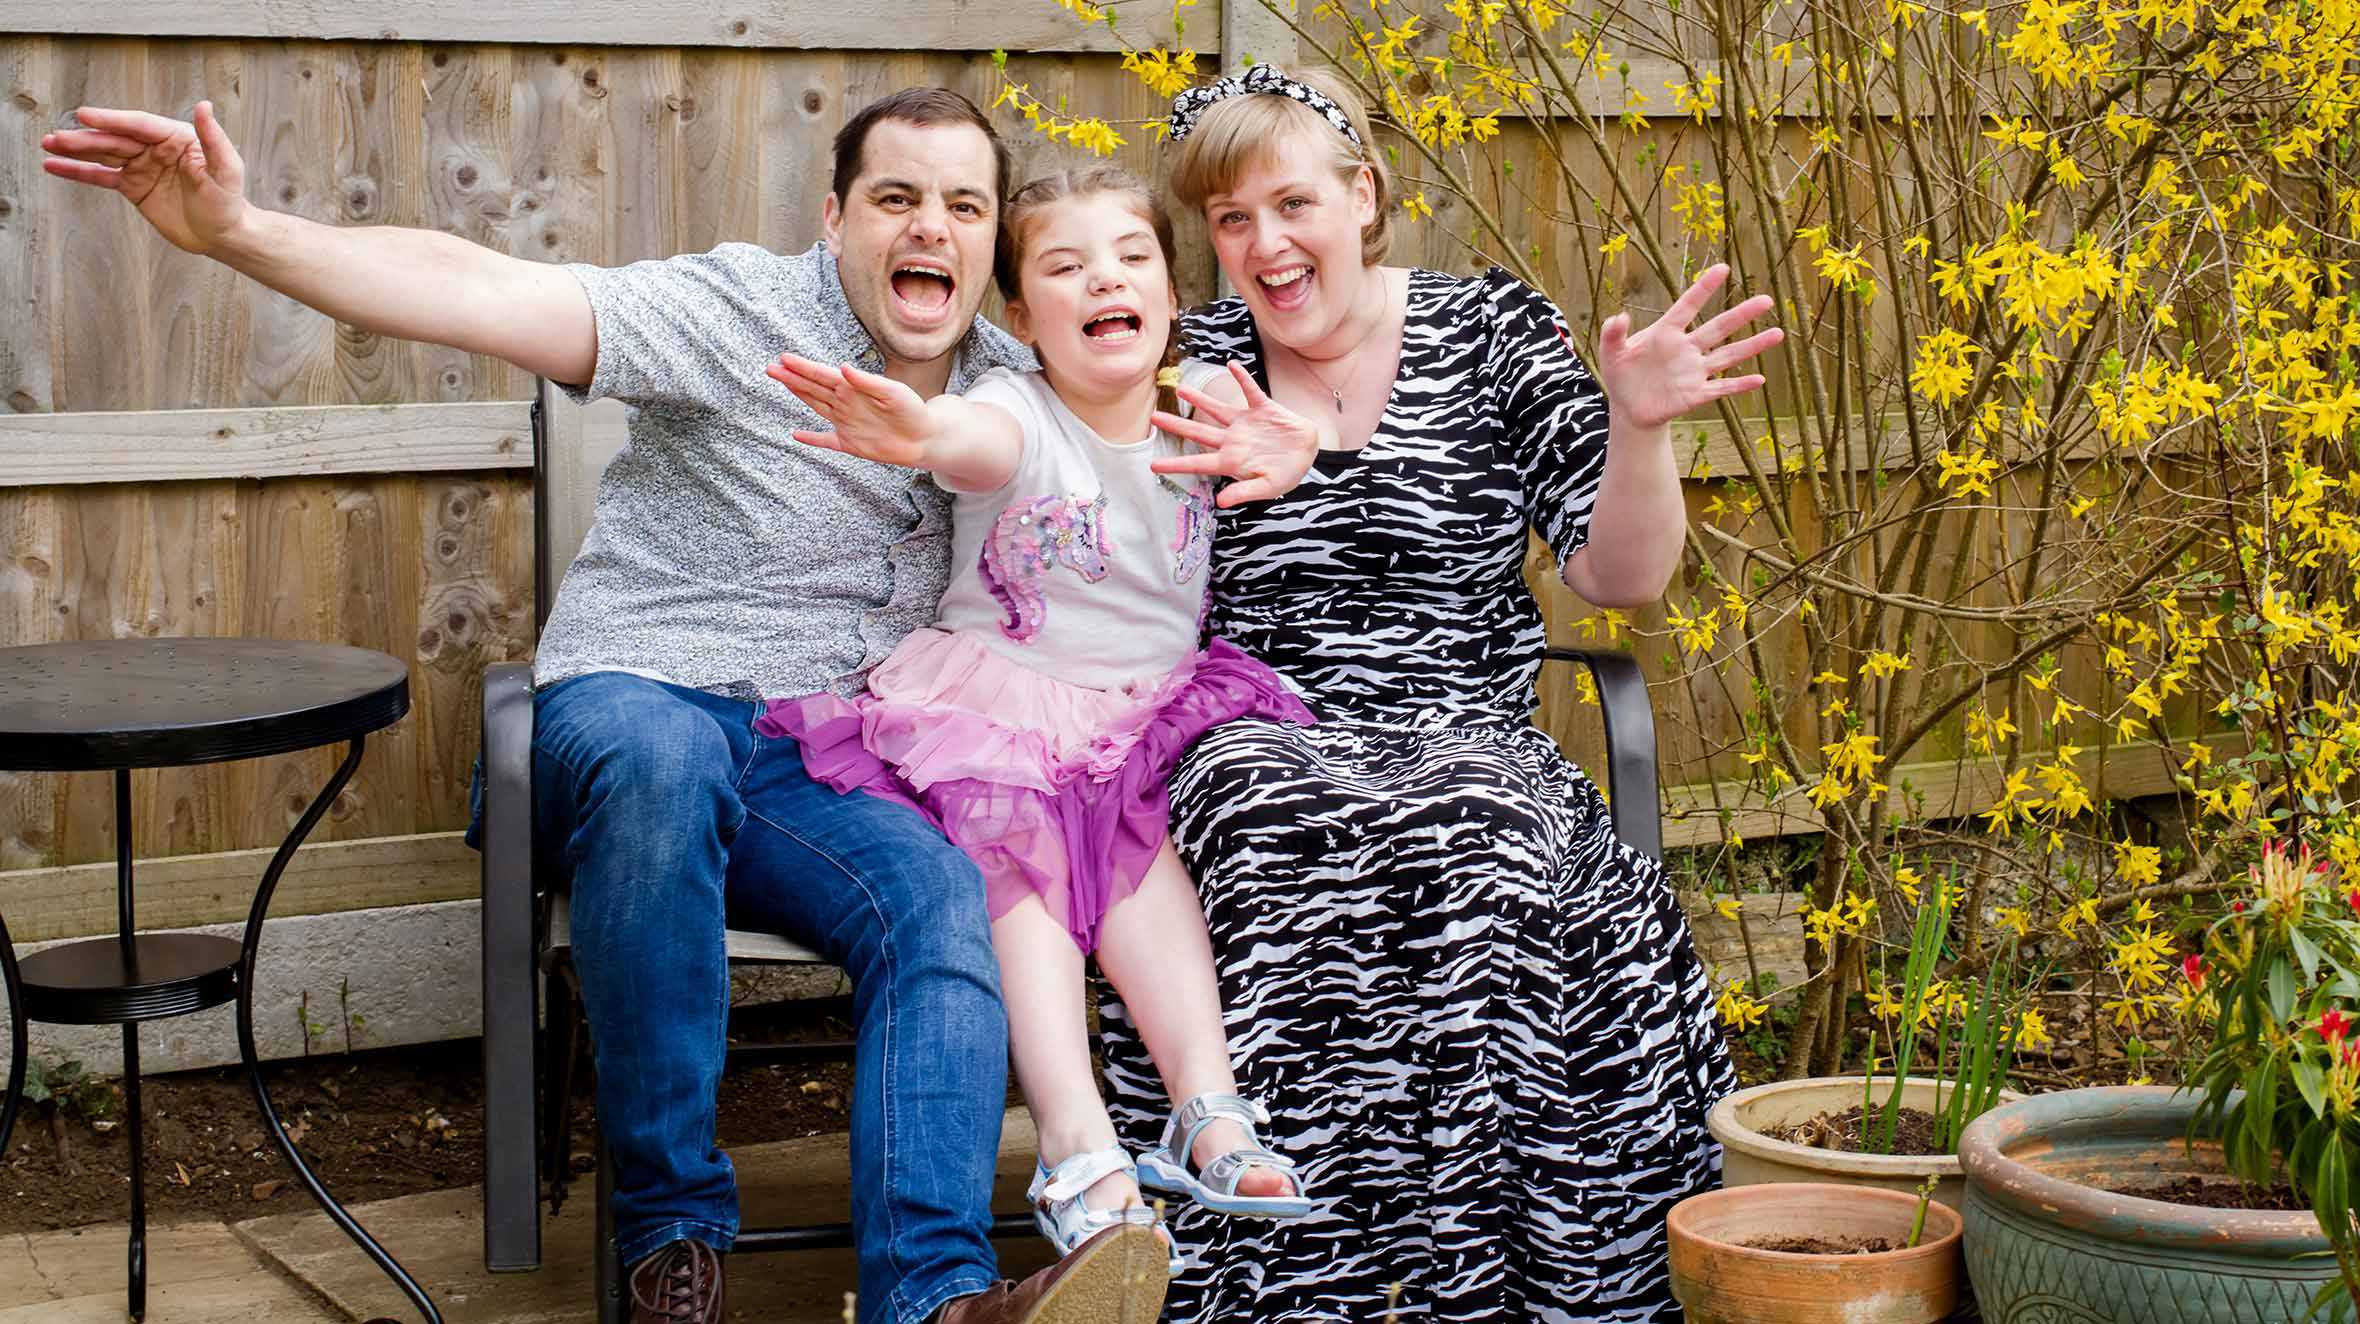 Gracie and her parents on their garden bench, smiling and waving at the camera